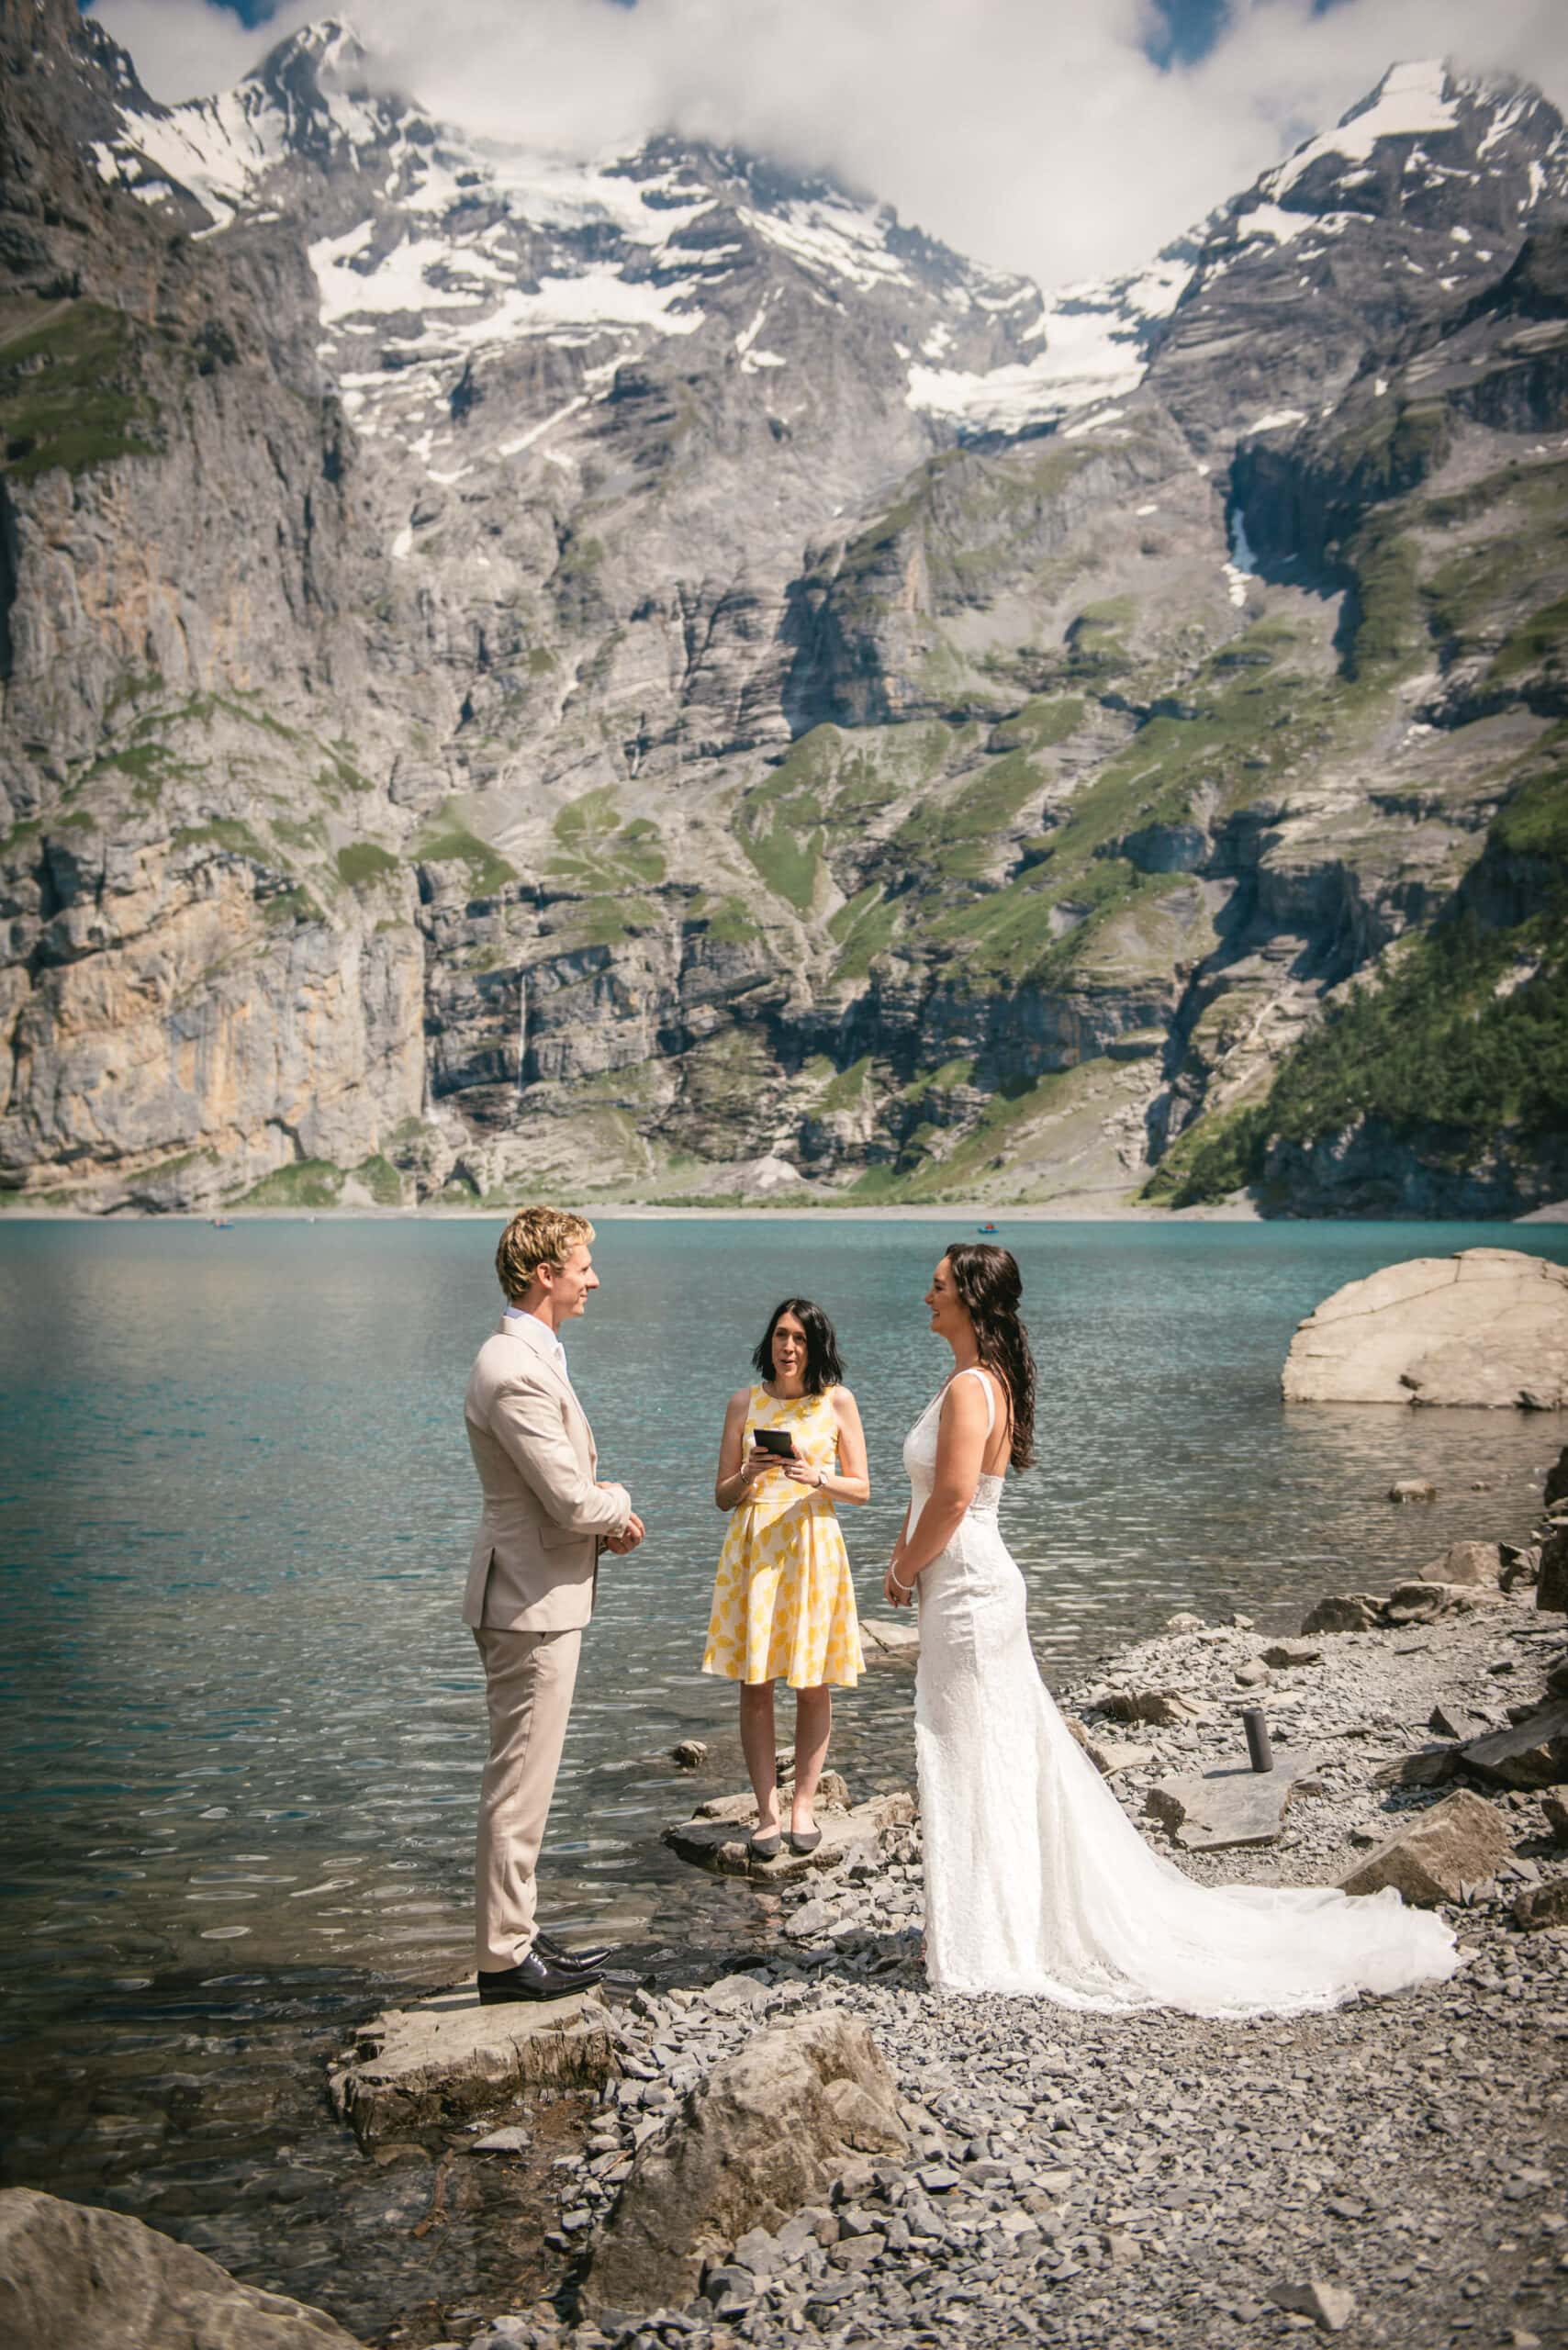 Love's journey painted with peaks - a mesmerizing hiking elopement.